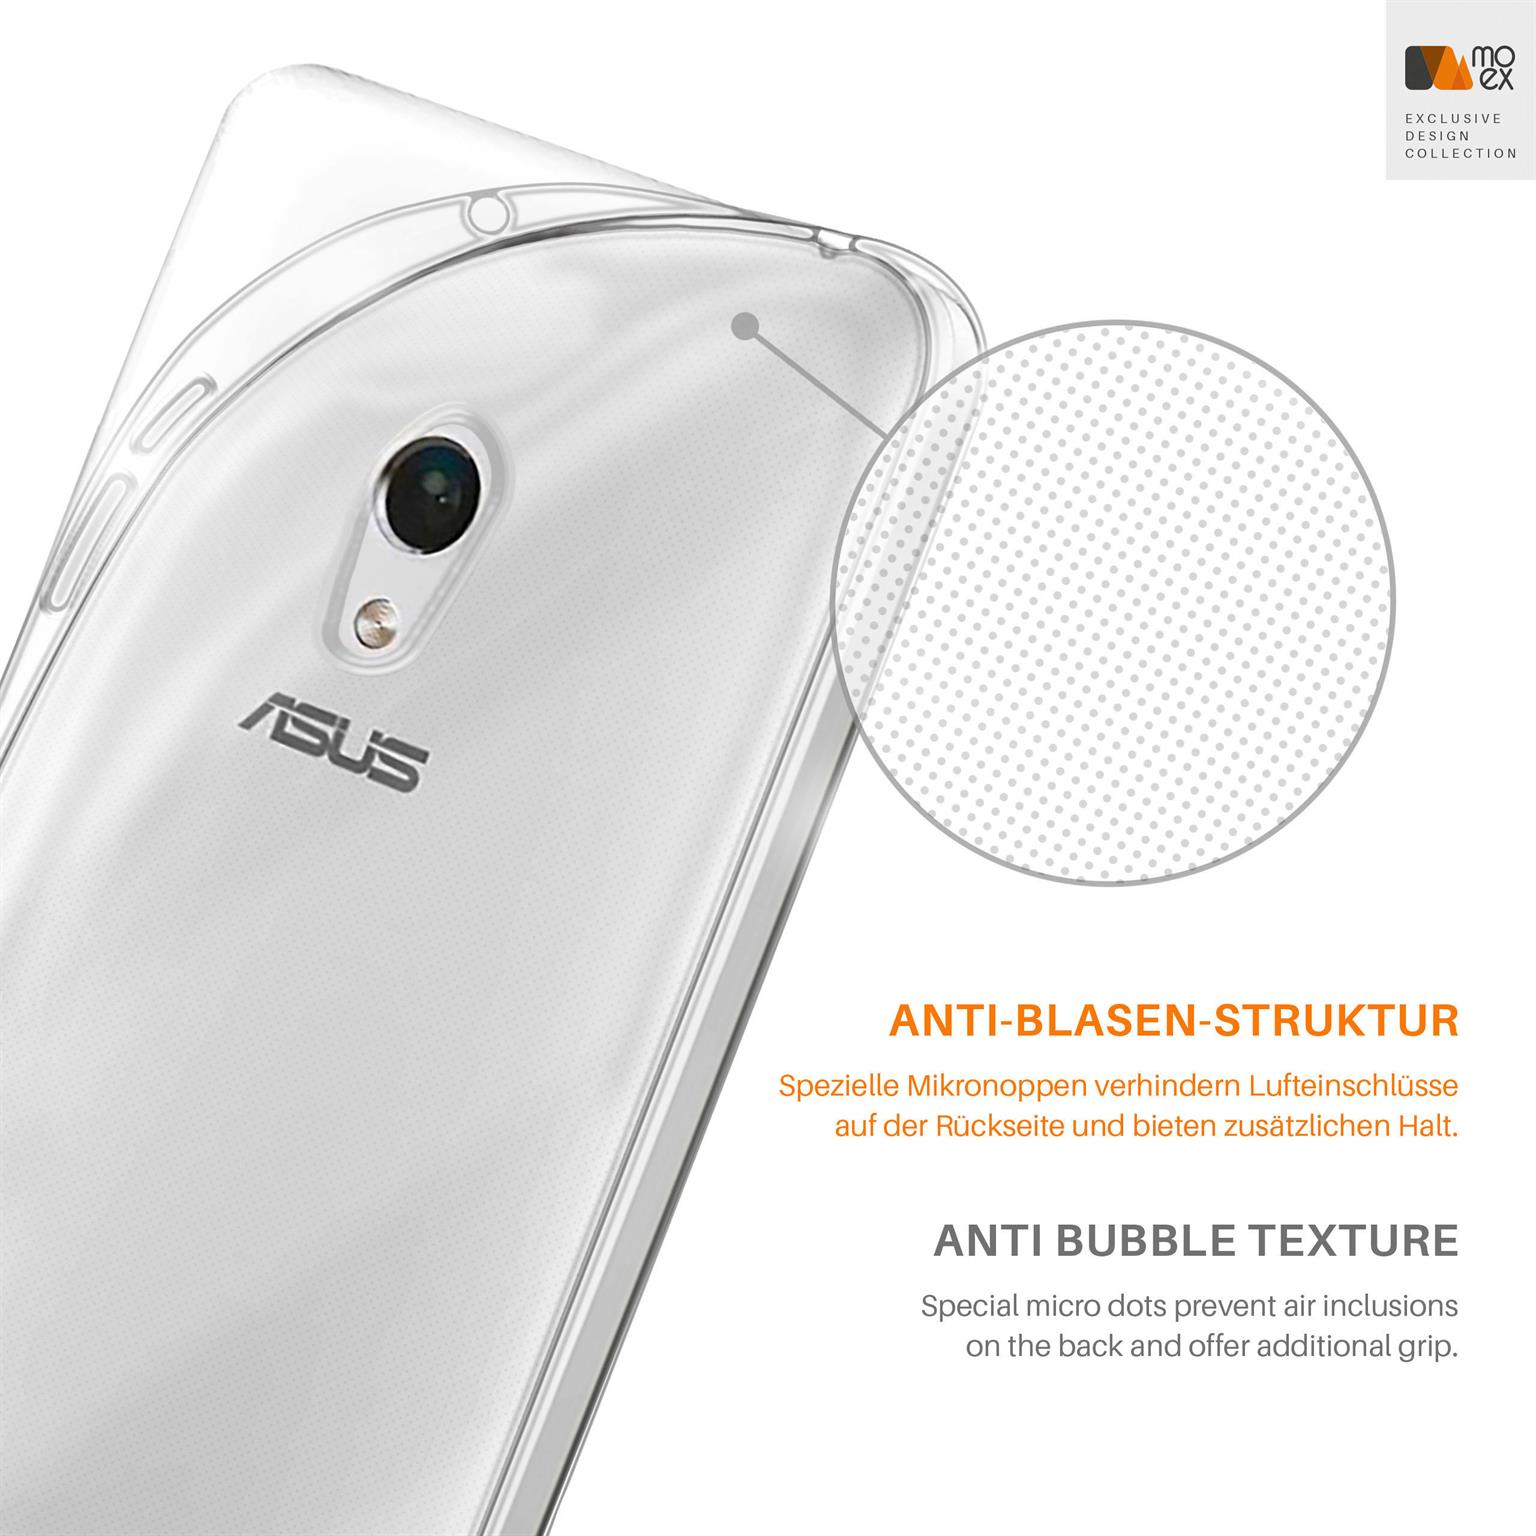 MOEX Aero Case, Zenfone ASUS, (2014), Backcover, Asus 5 Crystal-Clear